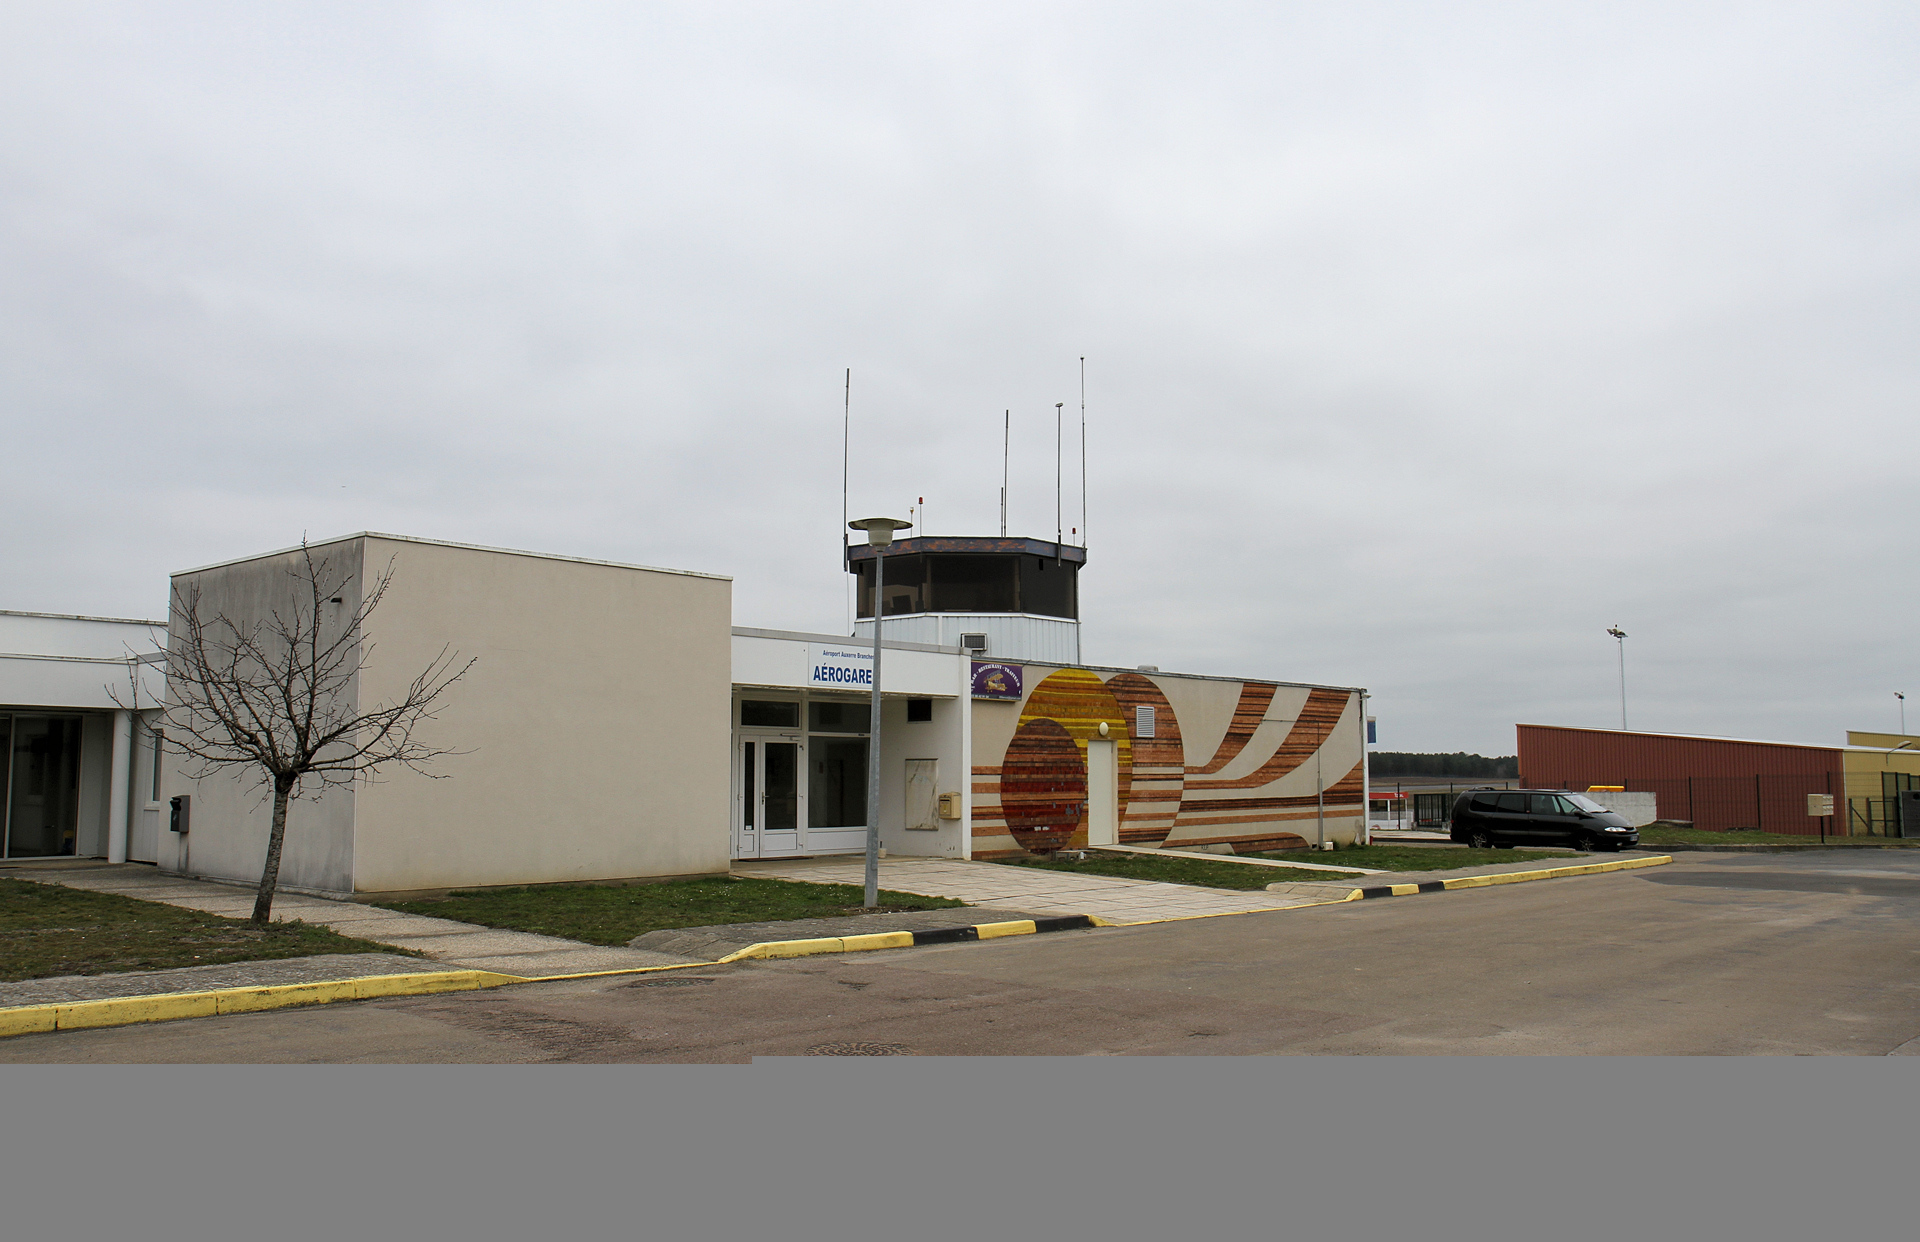 Auxerre Branches Airport, Auxerre France (LFLA) - The tower and main entrance